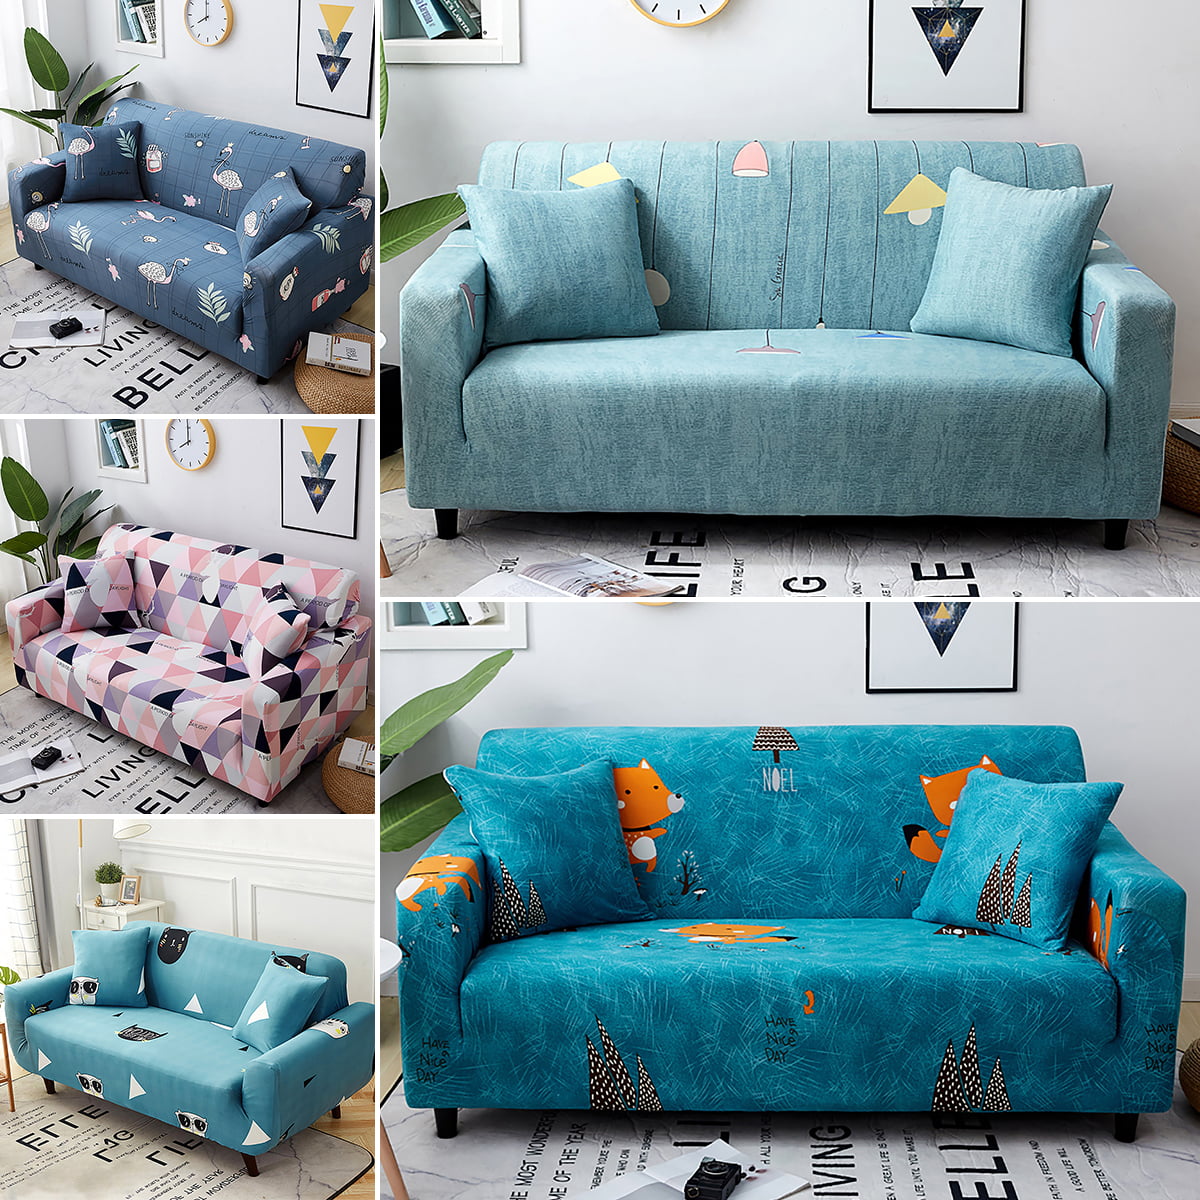 Colorful 1-4 Seats Stretch Sofa Covers,Elastic Fabric Sofa Cover  Sectional/Corner Couch Covers Fit Home Decor